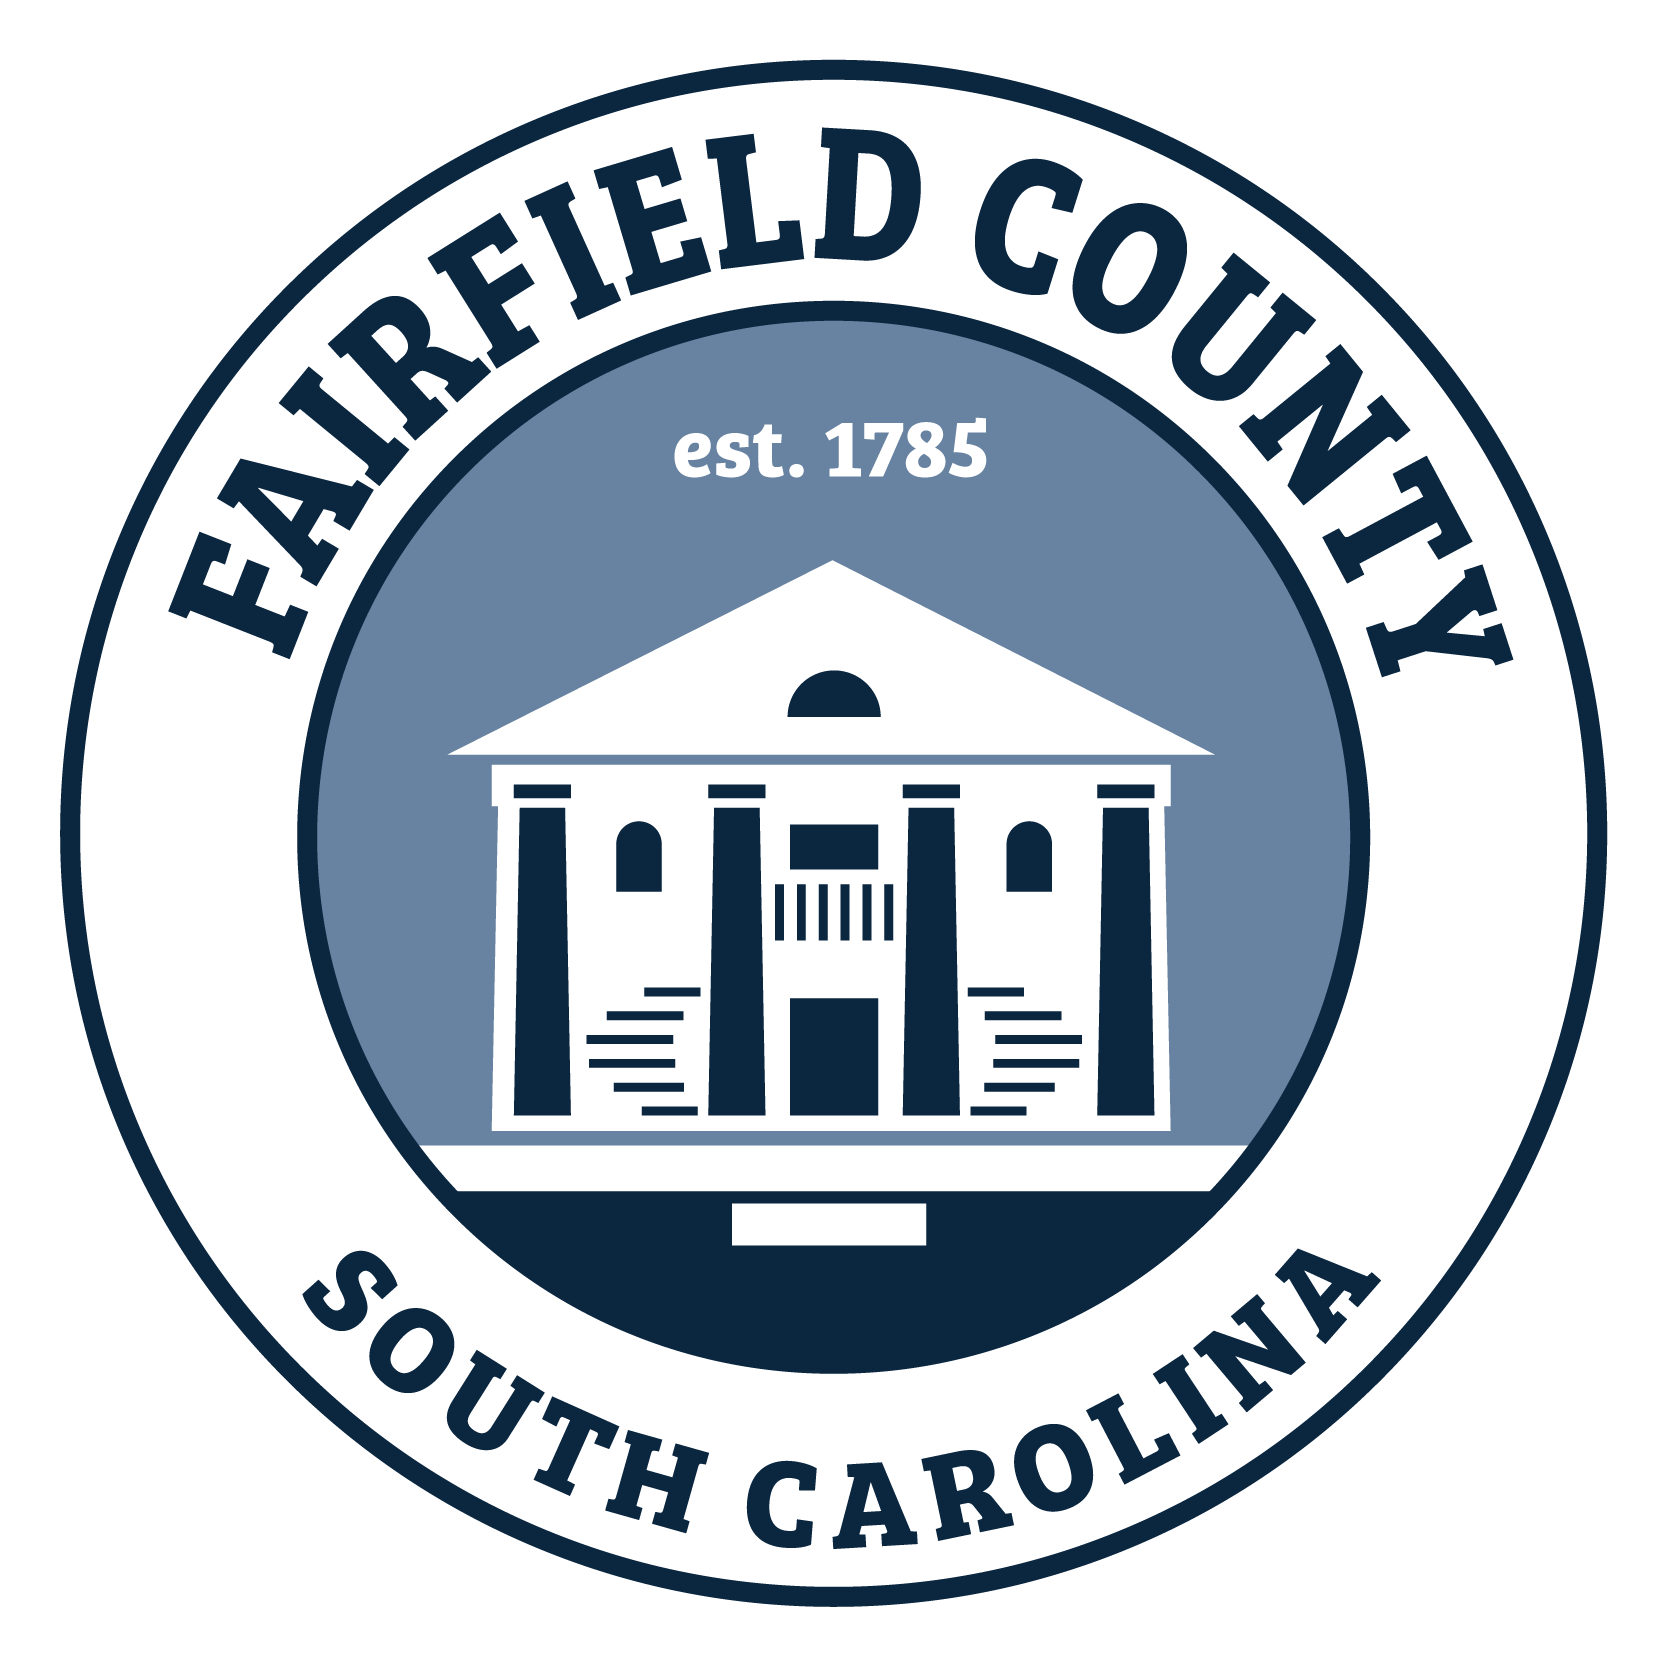 Image for Fairfield County Welcomes 2 New Councilmembers, Re-elects Leadership